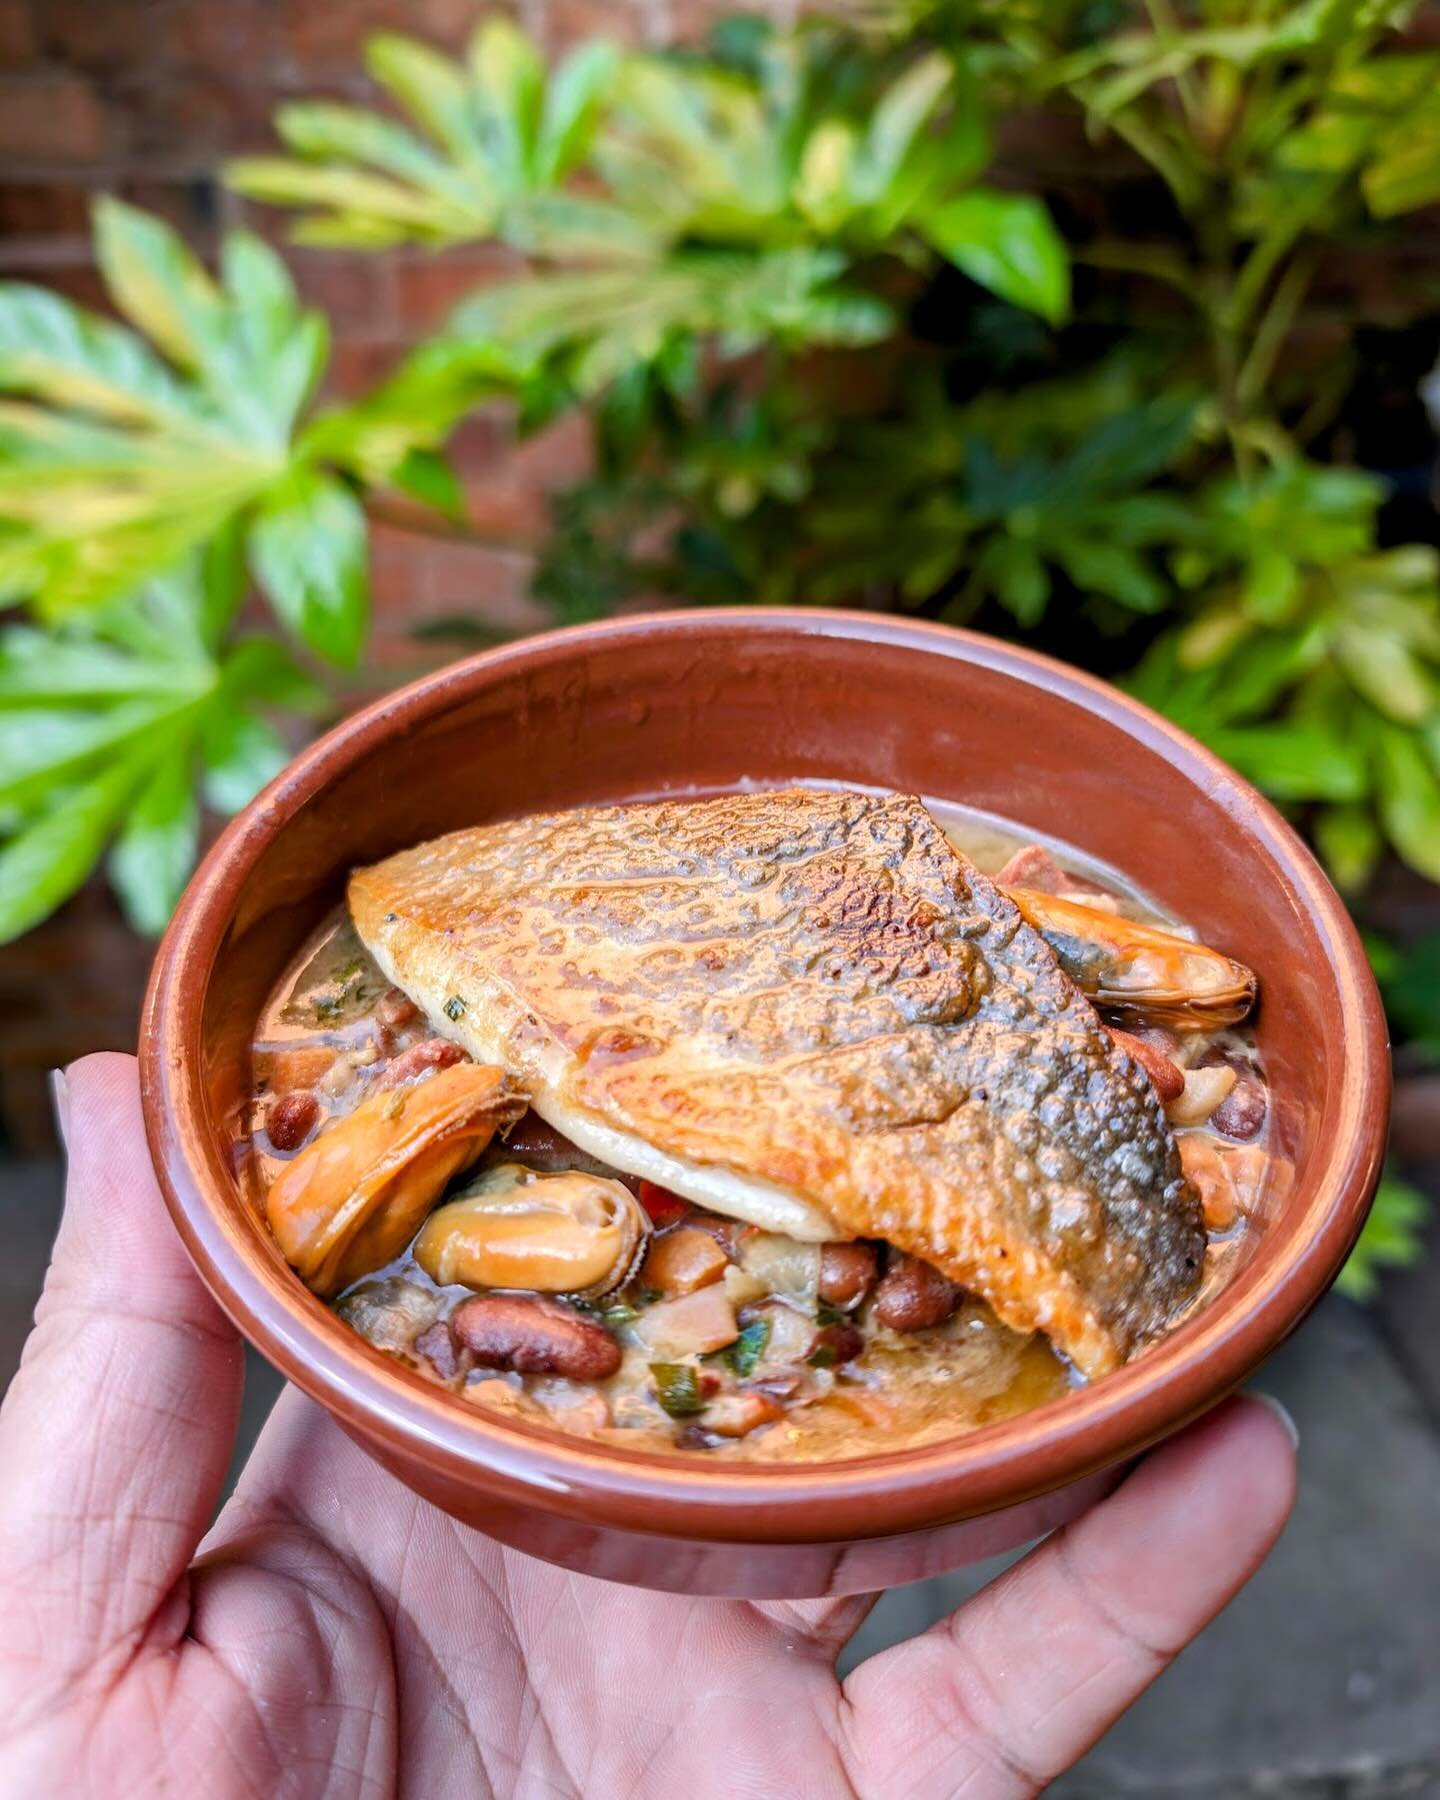 -𝙉𝙀𝙒 𝙊𝙉 𝙏𝙃𝙀 𝙈𝙀𝙉𝙐-

Sea Bream with Chorizo and Pinto Bean Broth, finished with Cream and Sweet Pickled Mussels. 

Experience the perfect blend of flavors at 
2 Bridges. Don&rsquo;t miss out .

📍4, St Peters Cl, Commercial St, Hereford HR1